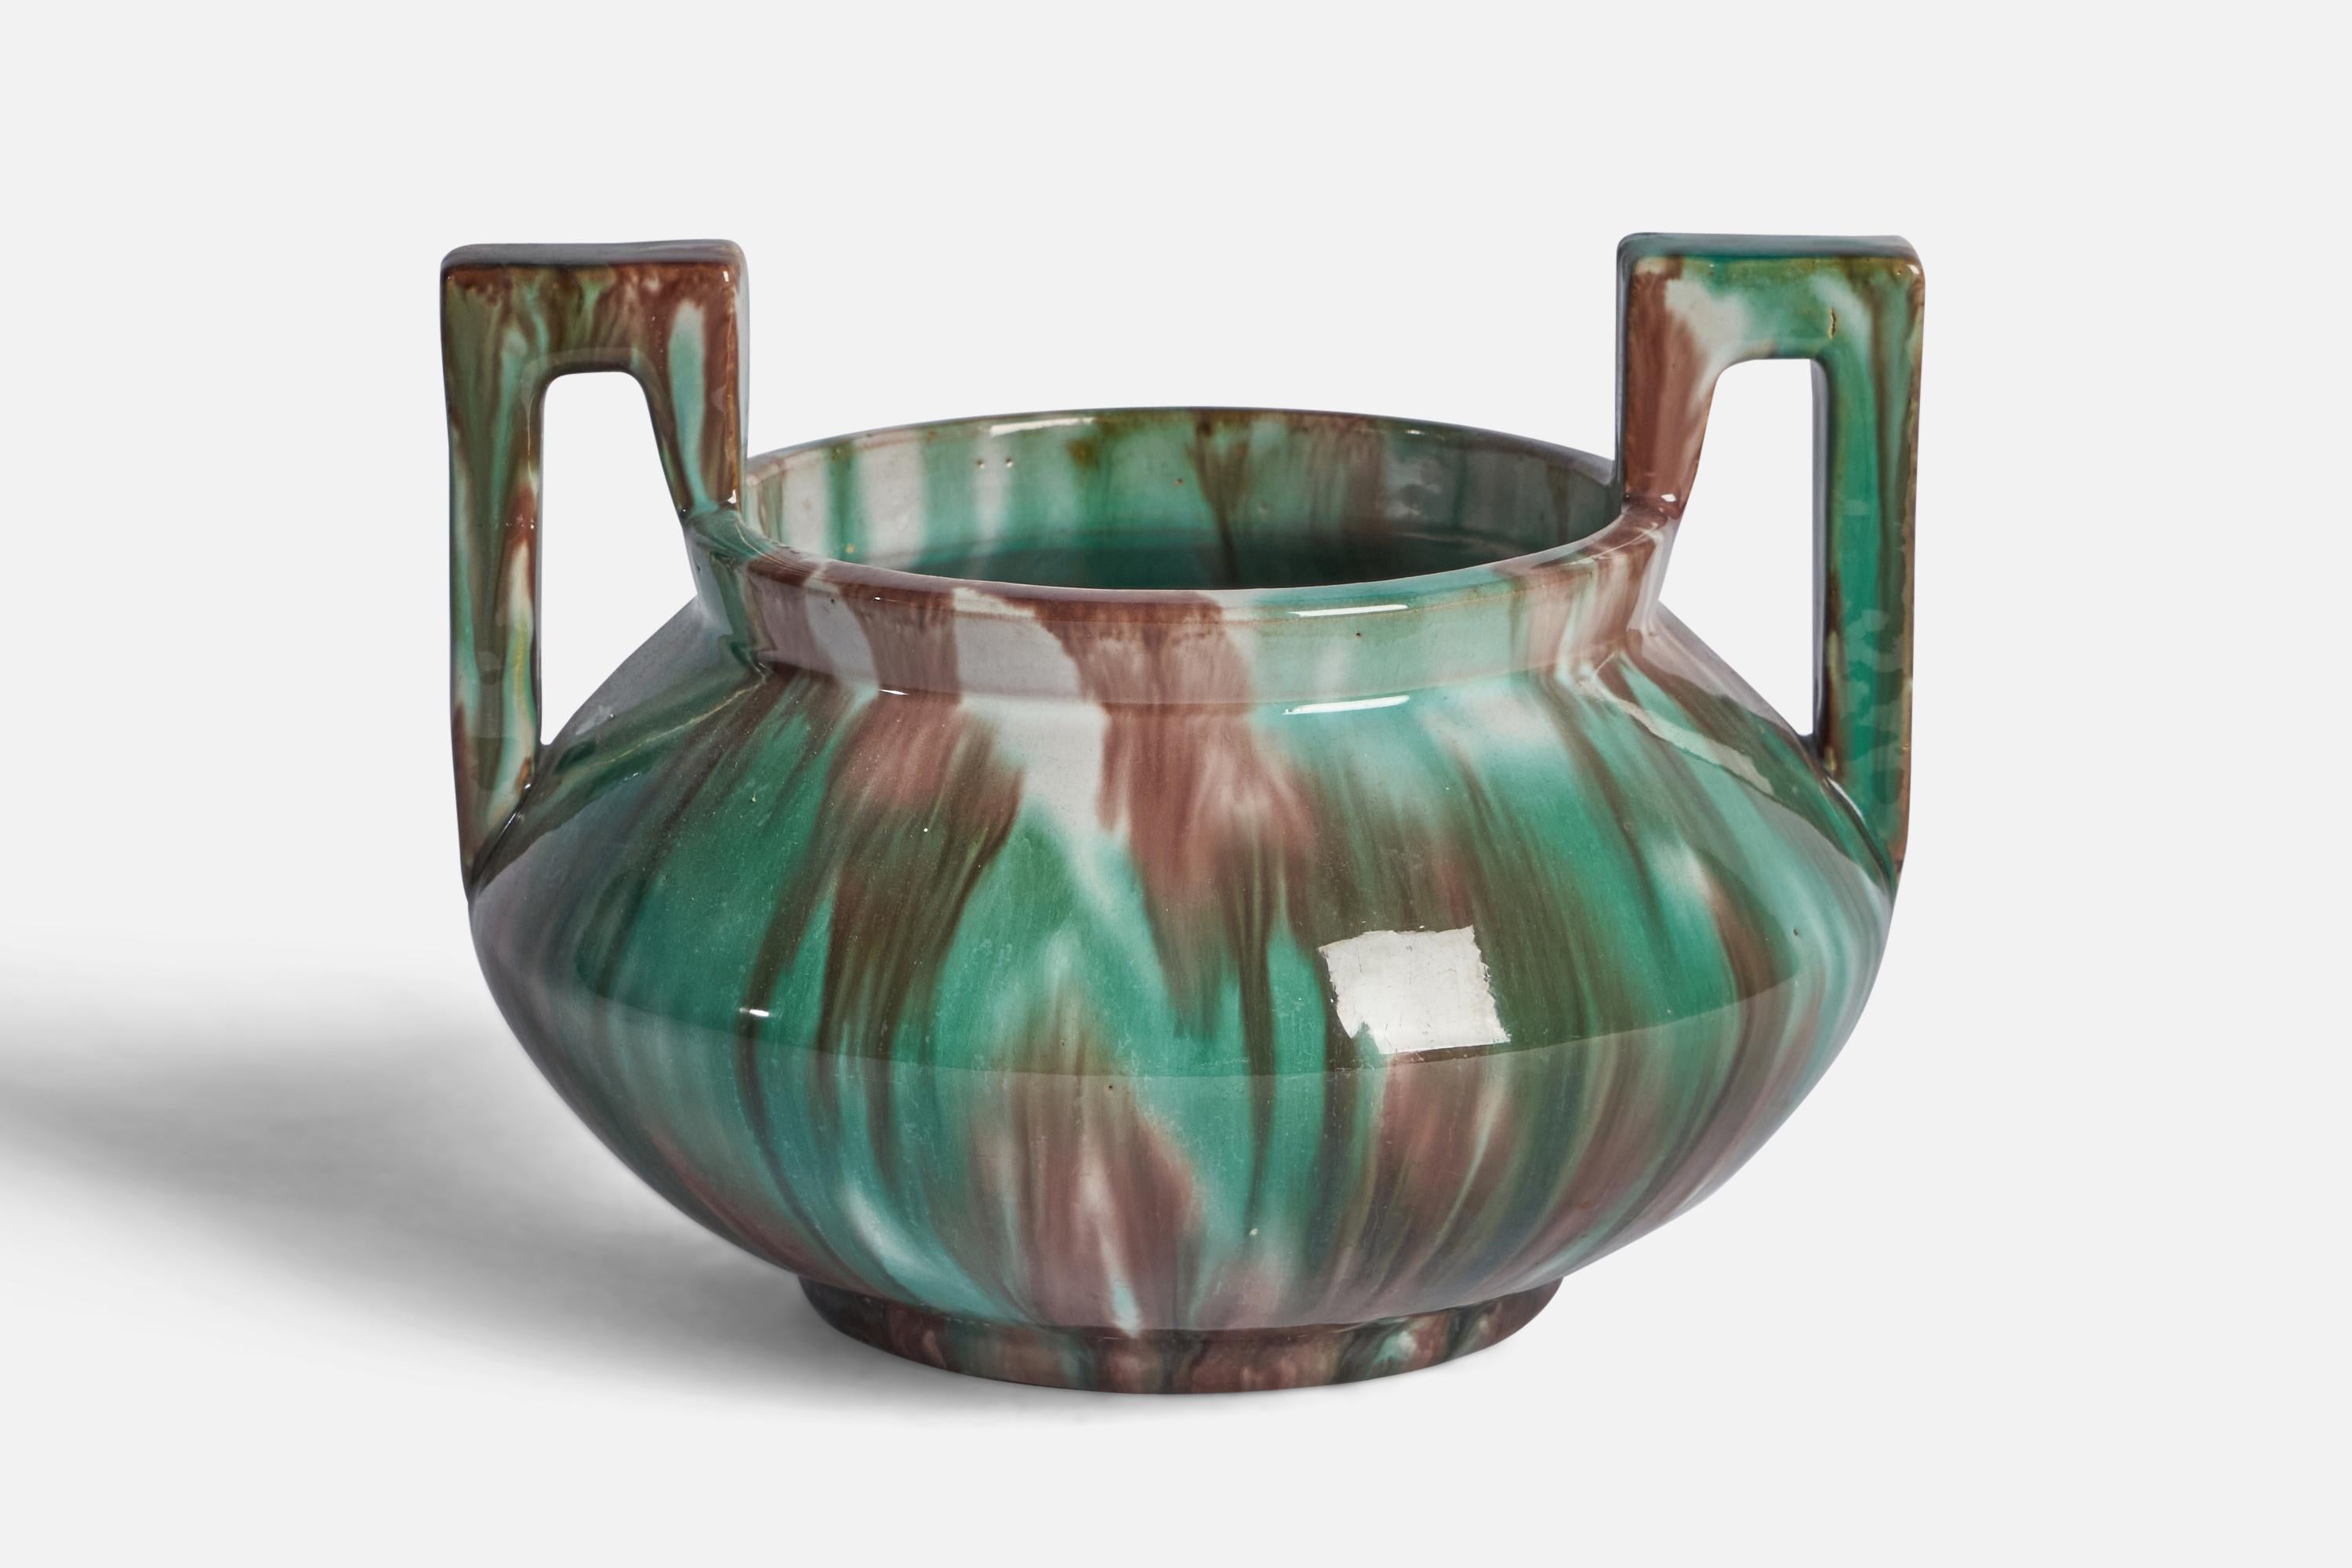 A green and brown-glazed earthenware vase designed and produced by Gustaf Ahlberg, Höganäs, Sweden, c. 1920s.